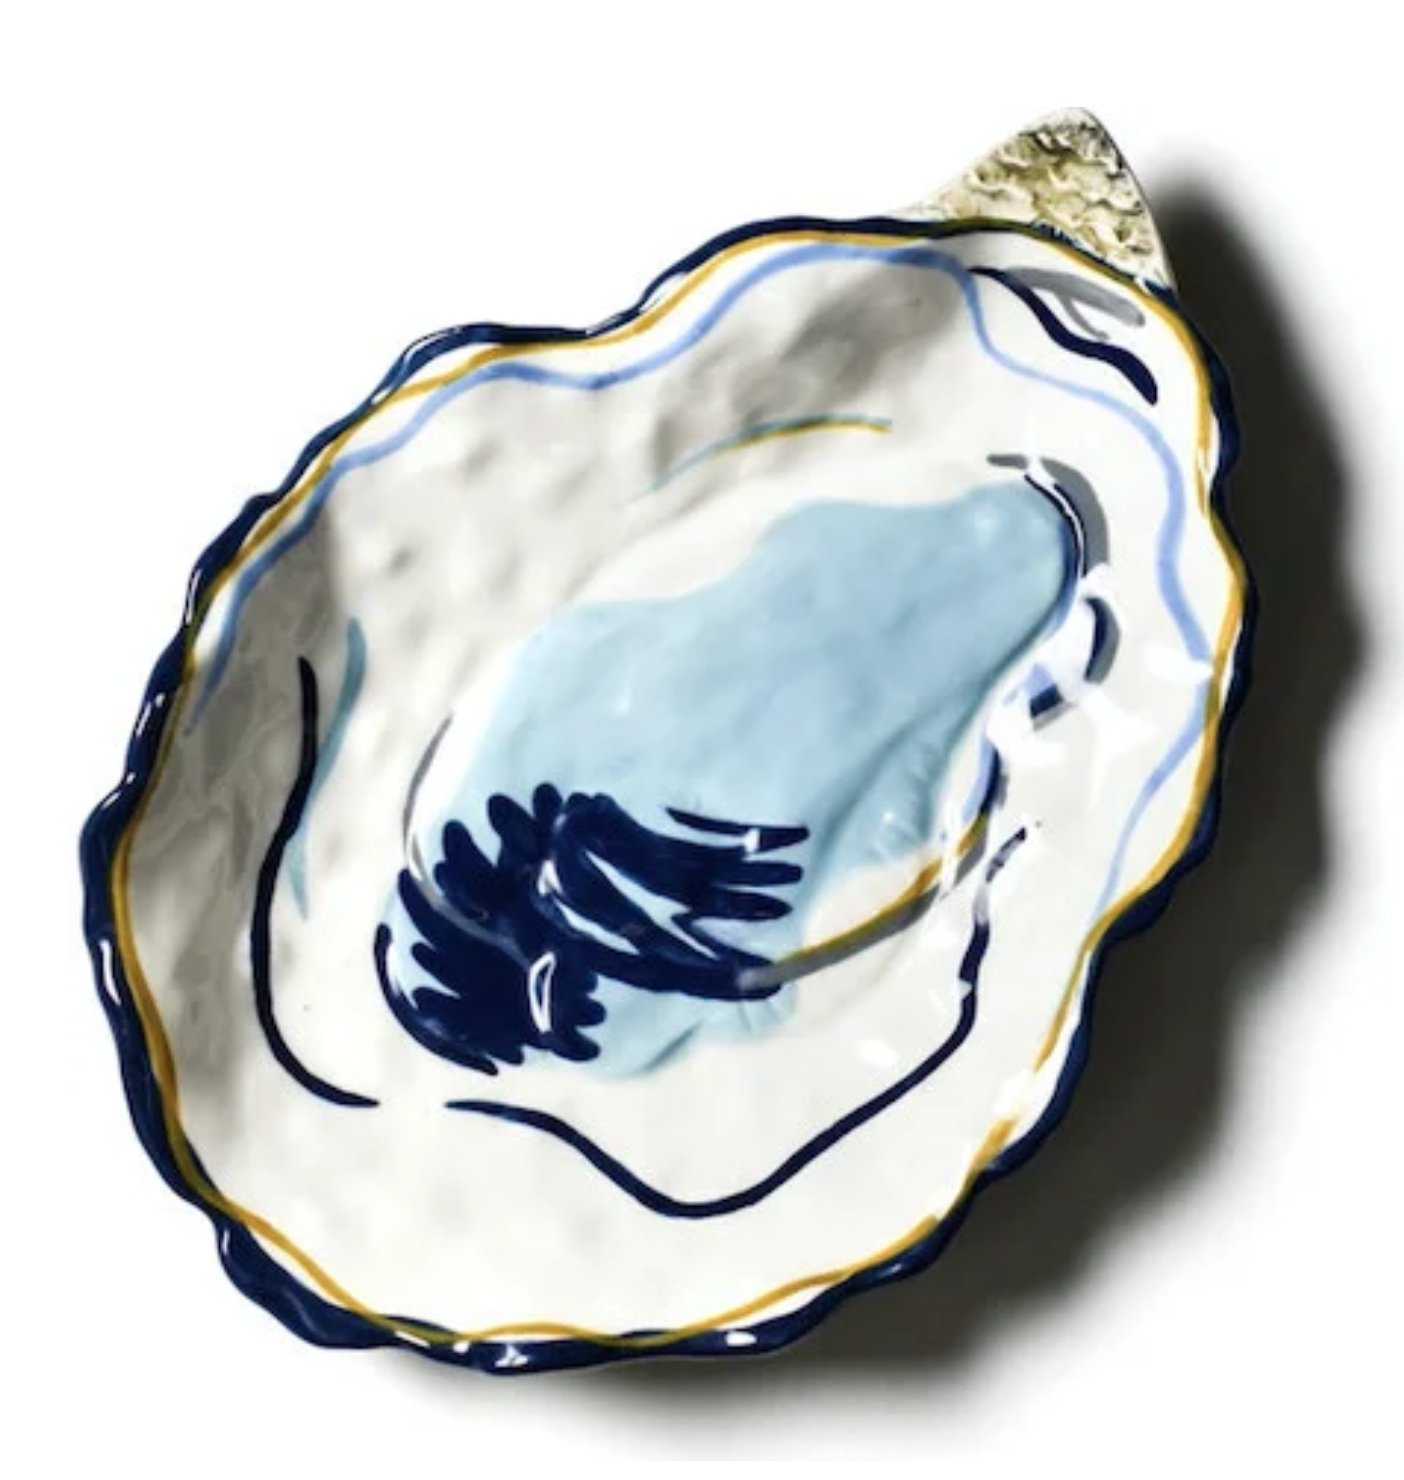 Oyster colored trinket dish that can be used as decoration, jewelry dish or a soap dish